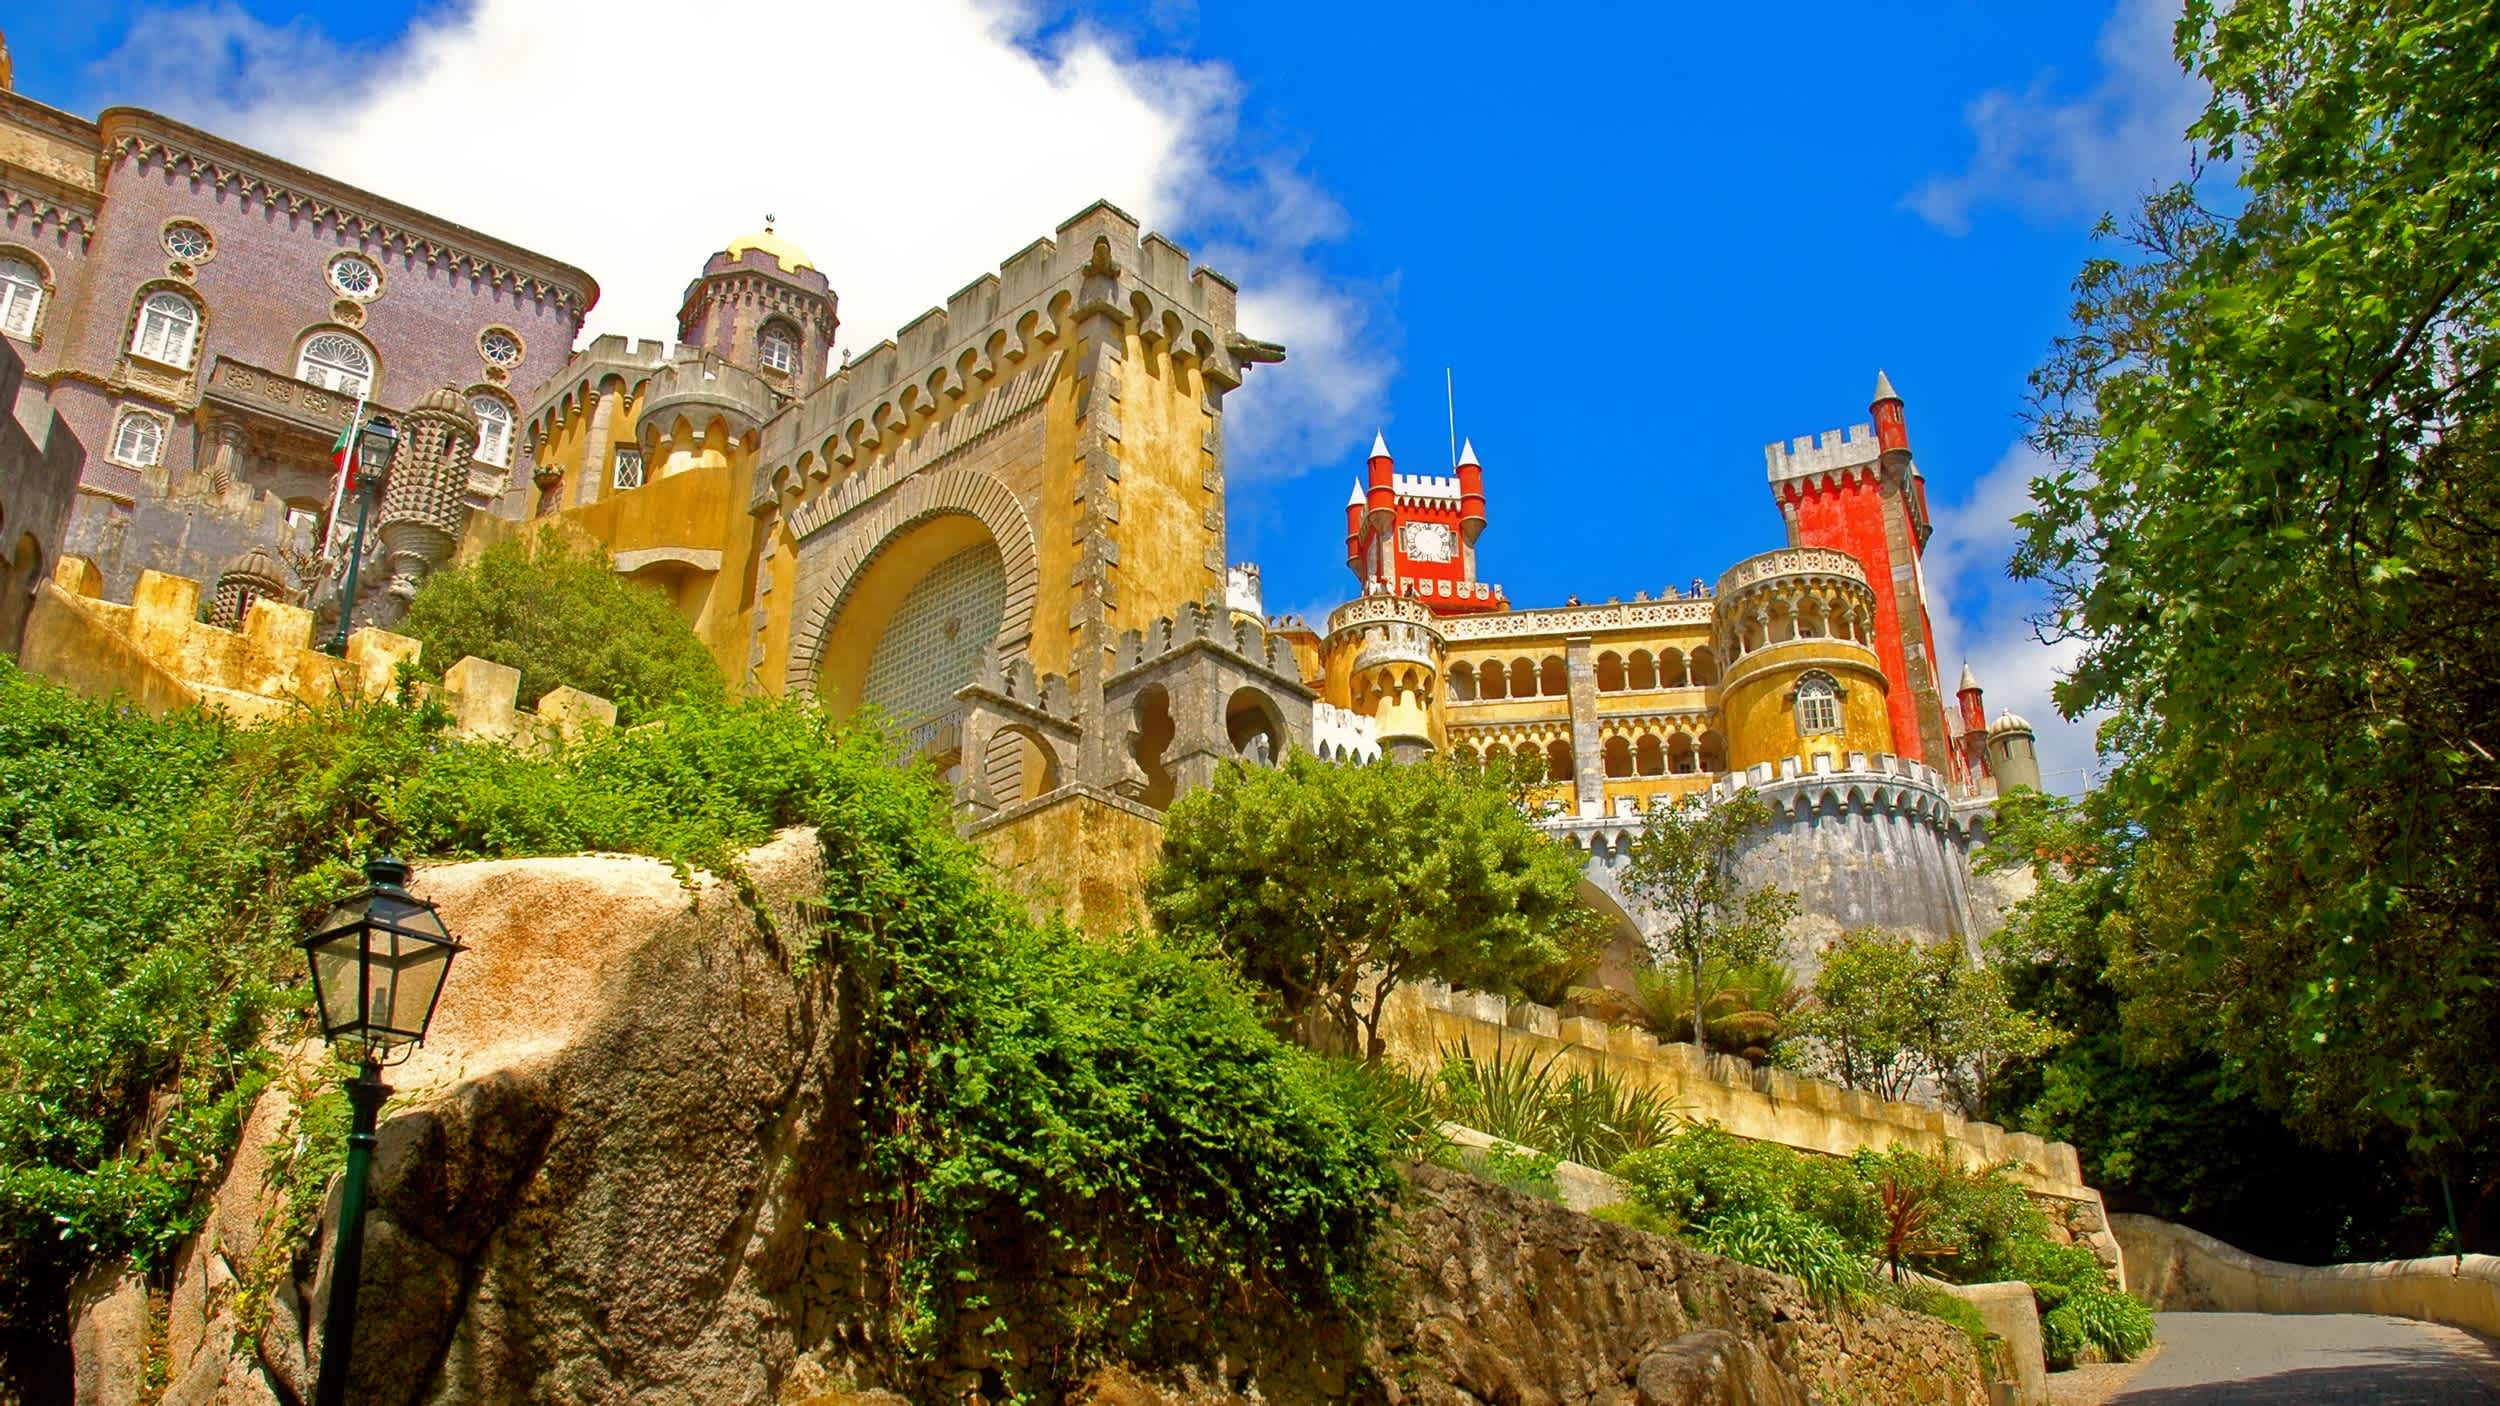 Pena National Palace in Sintra, Portugal. 